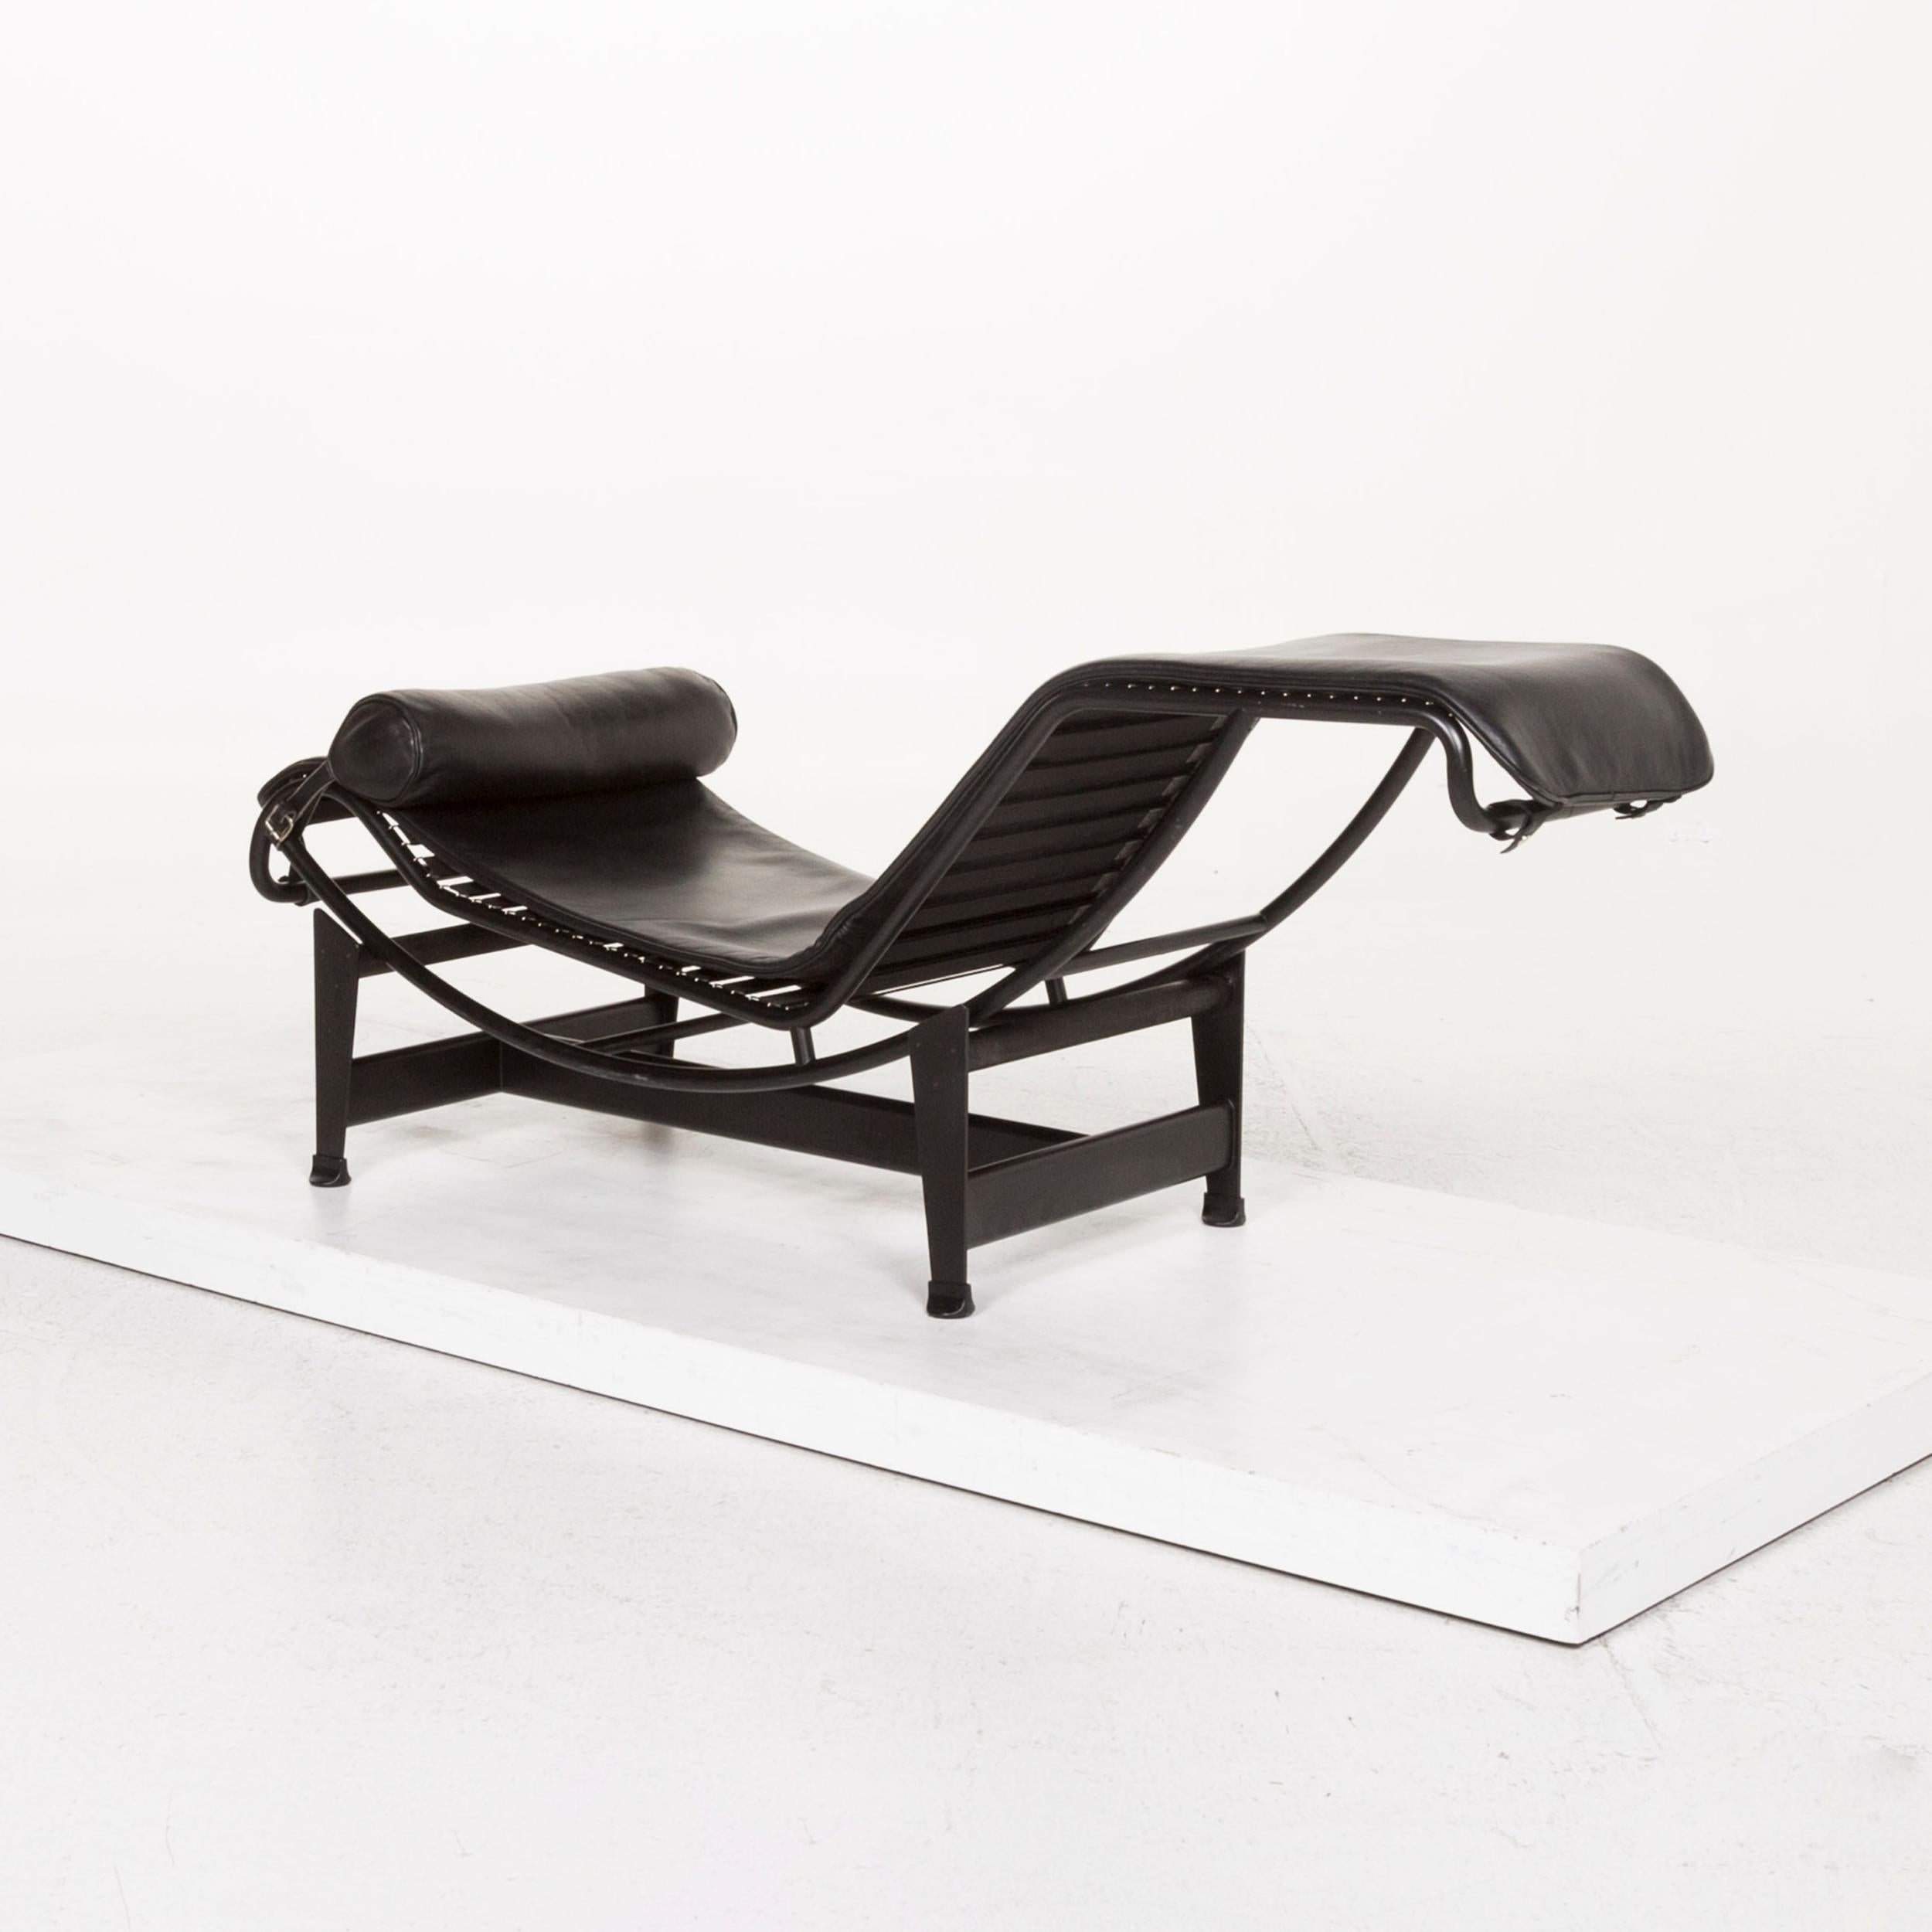 We present to you a Cassina Le Corbusier LC 4 lounger black relax lounger relax function.
 

 Product measurements in centimeters:
 

Depth 152
Width 59
Height 85
Seat height 34
Seat depth 52
Seat width 47
Back height 85.

 